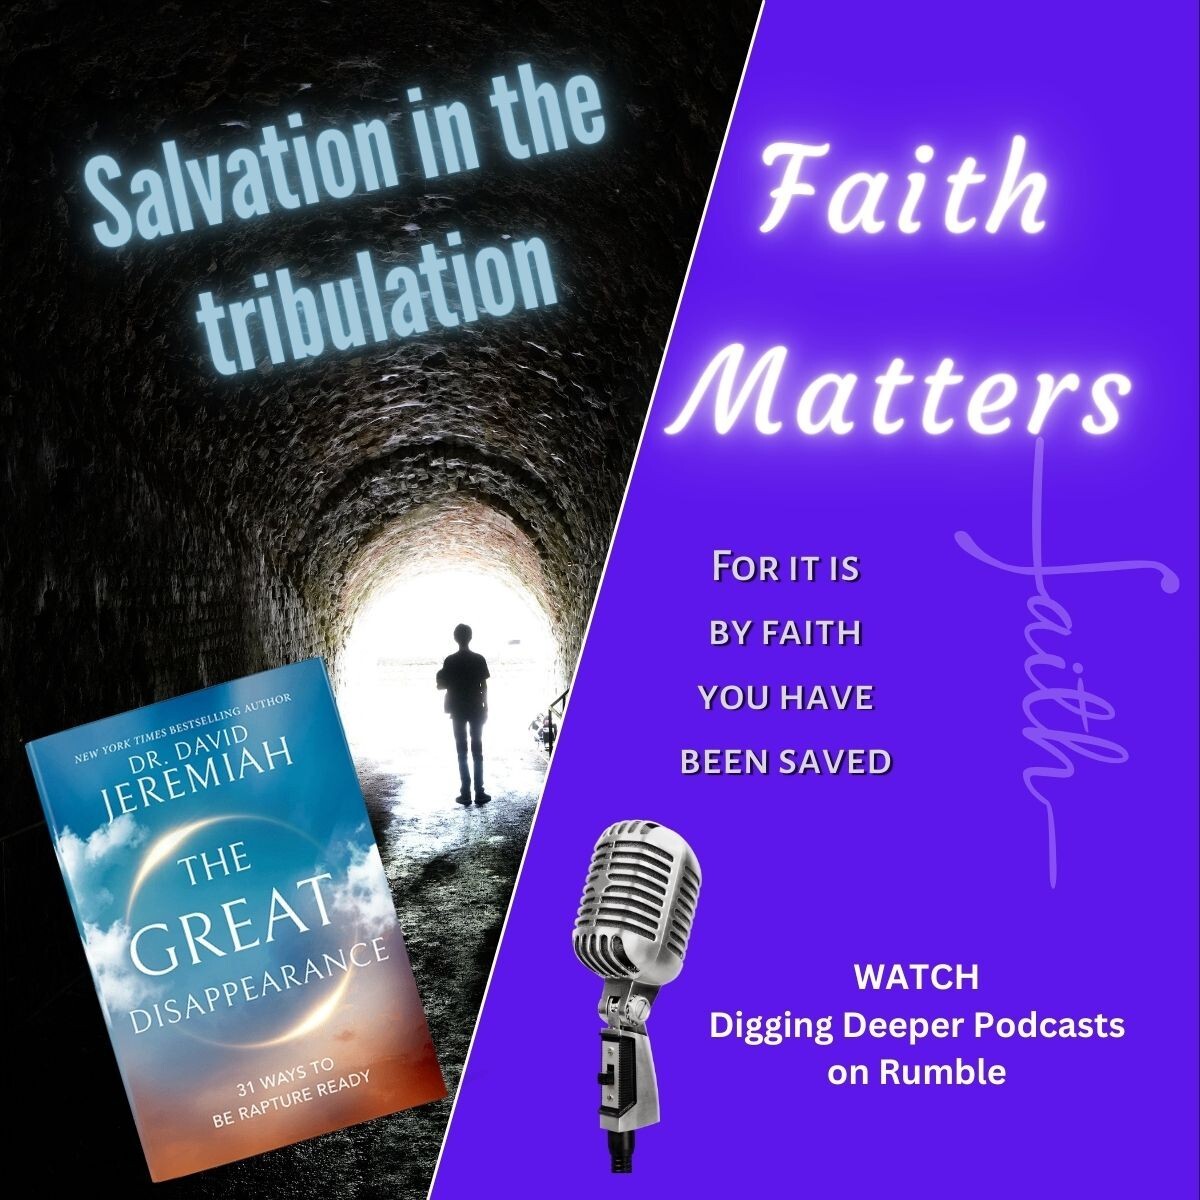 Ch 20 Salvation in the Tribulation - The Great Disappearance